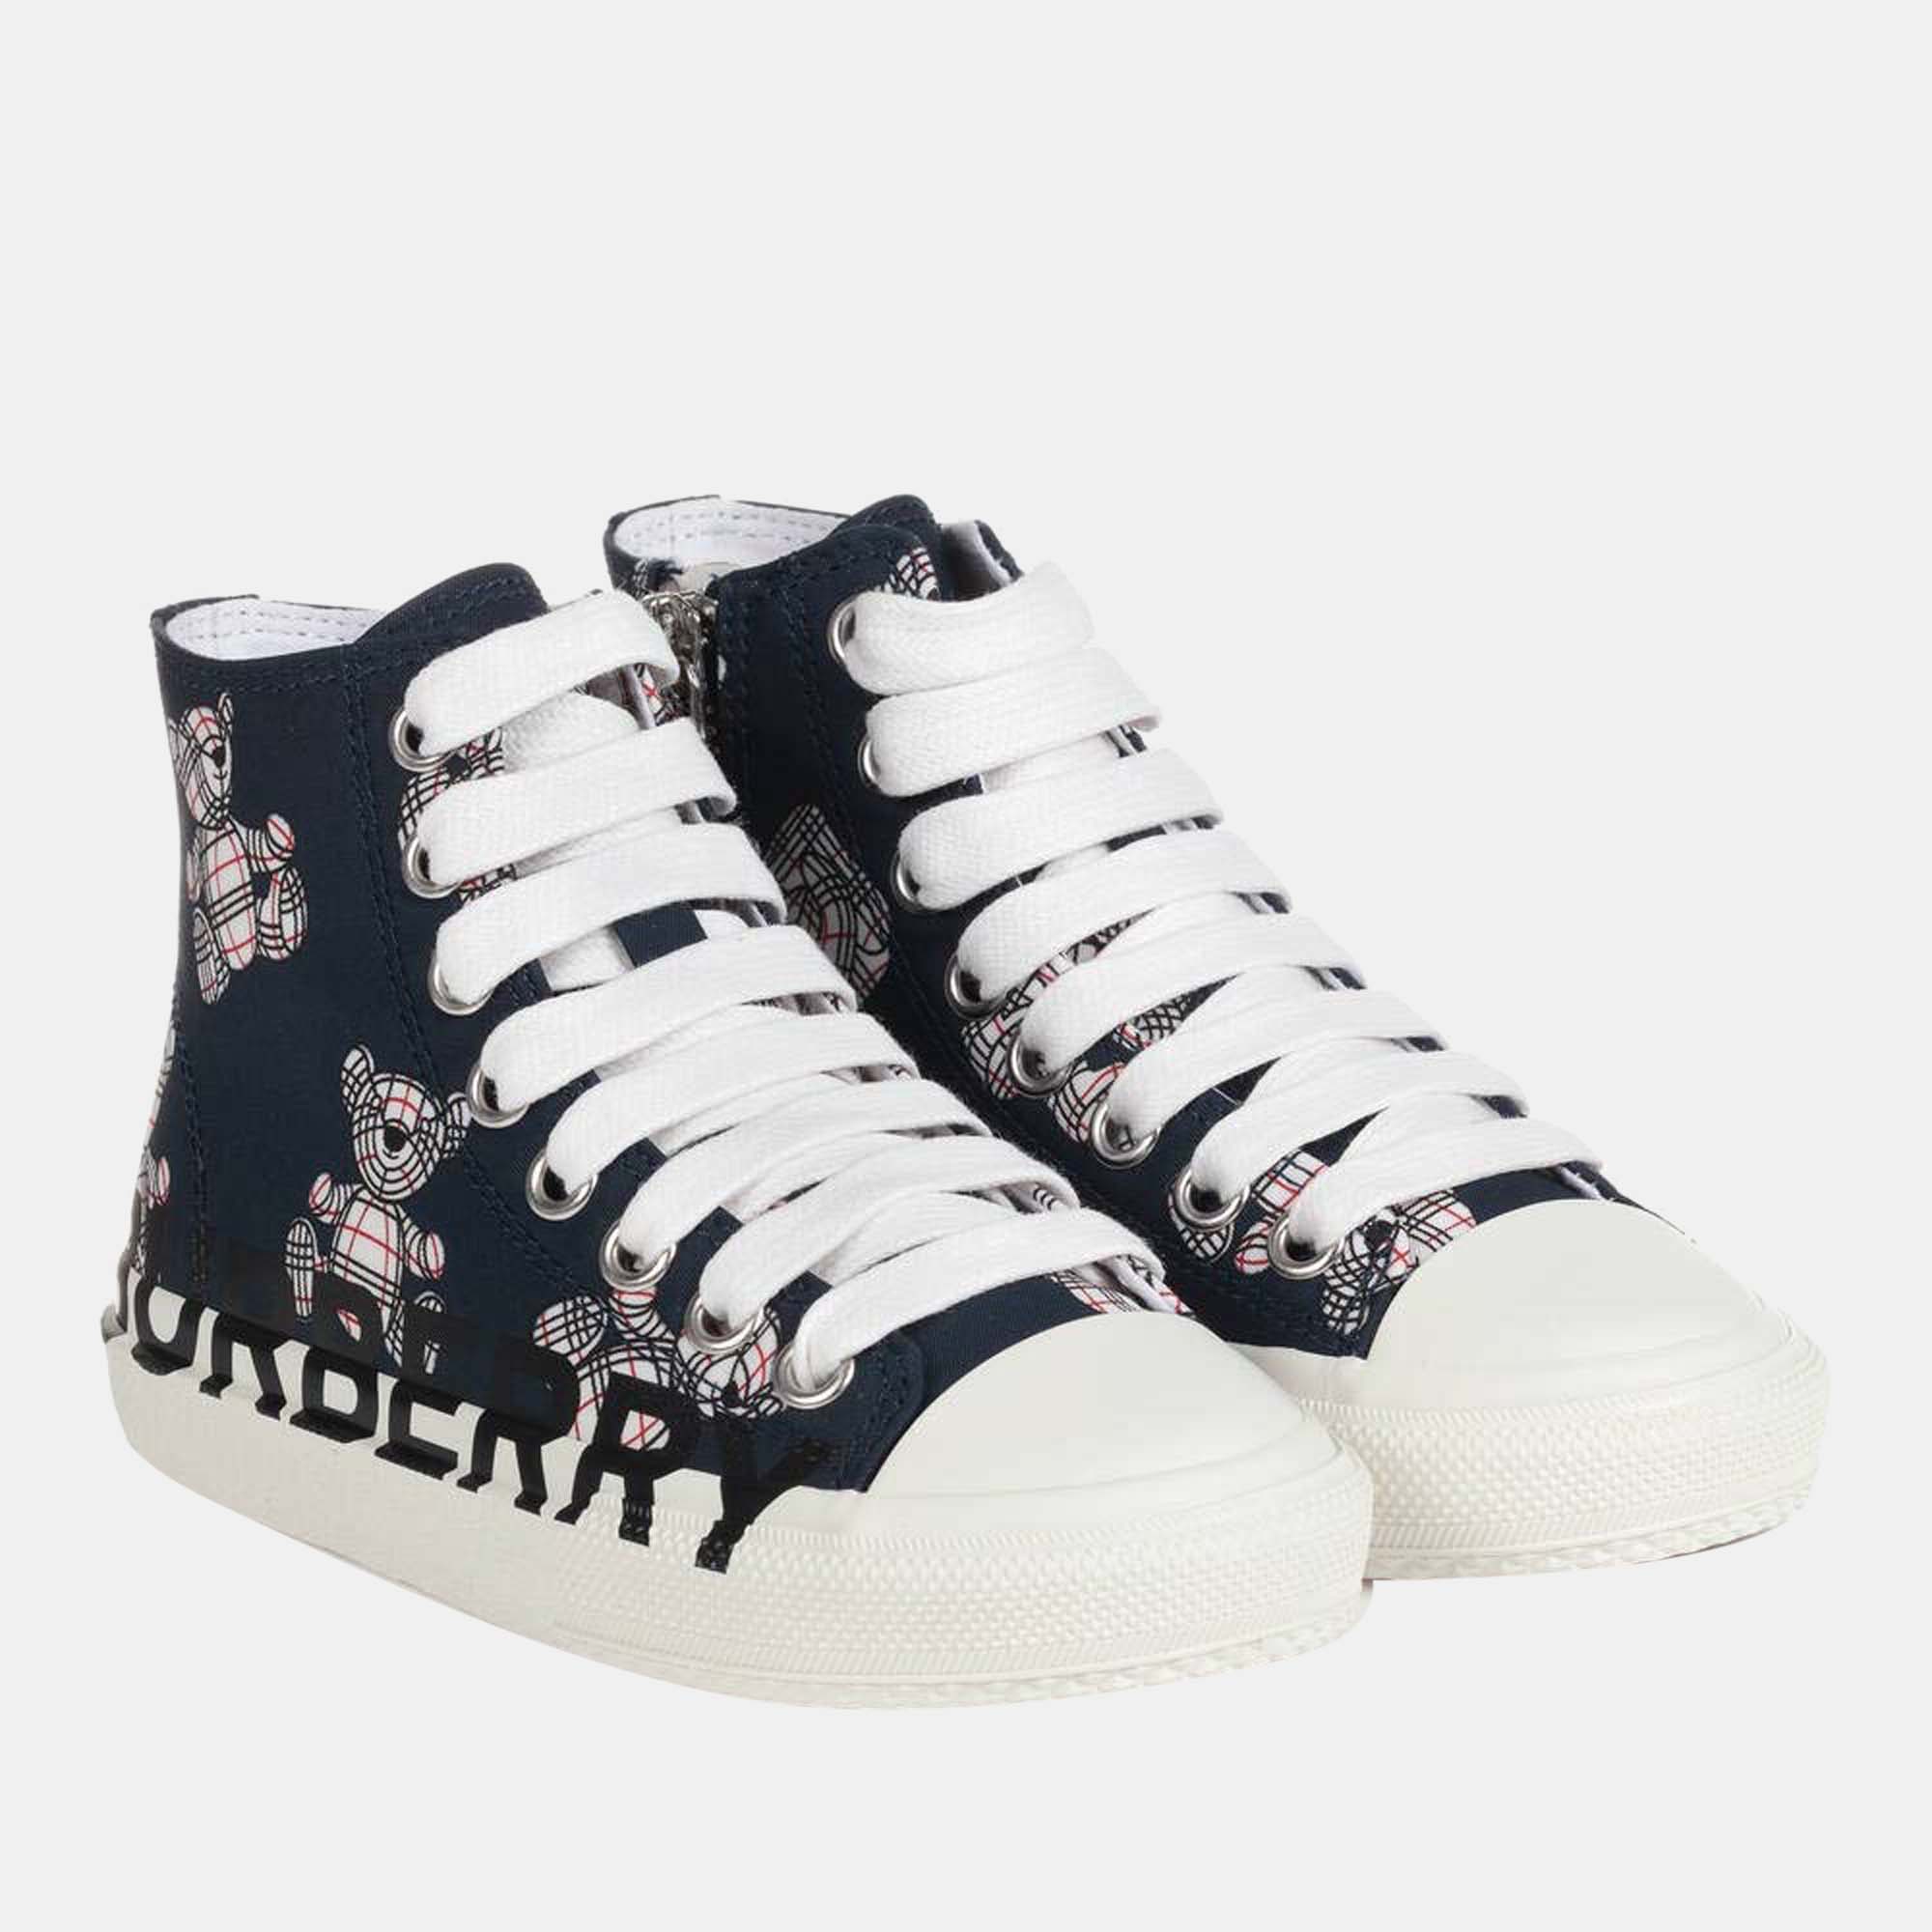 Burberry buberry (kids) navy blue - canvas & leather - high top kids larkhall sneakers - eu 32